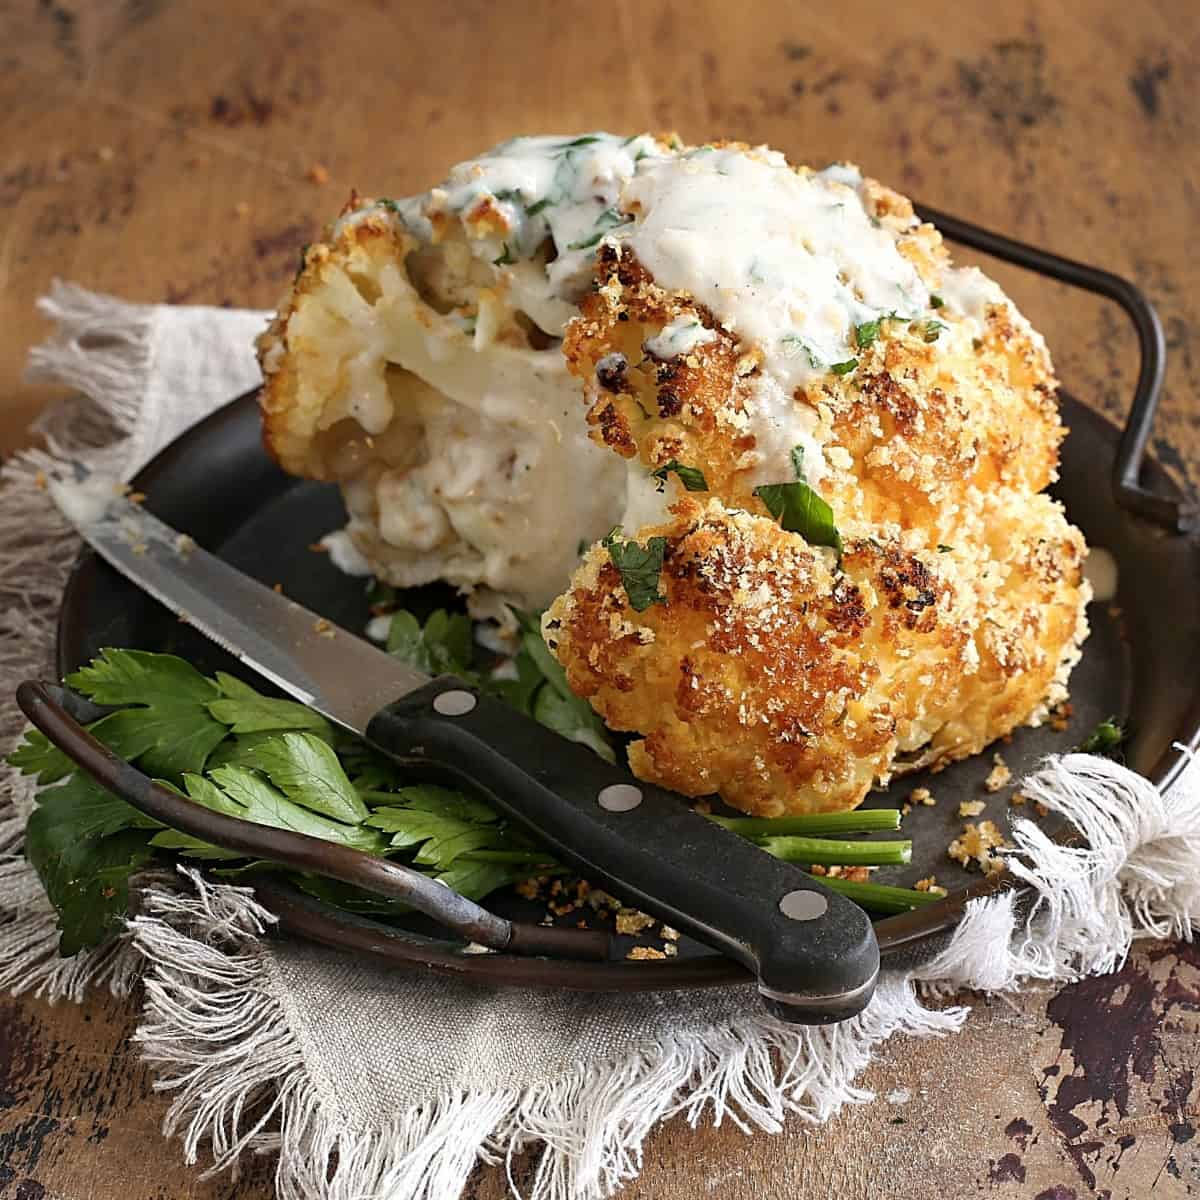 Square photo of a partially cut roasted cauliflower on a plate with a knife